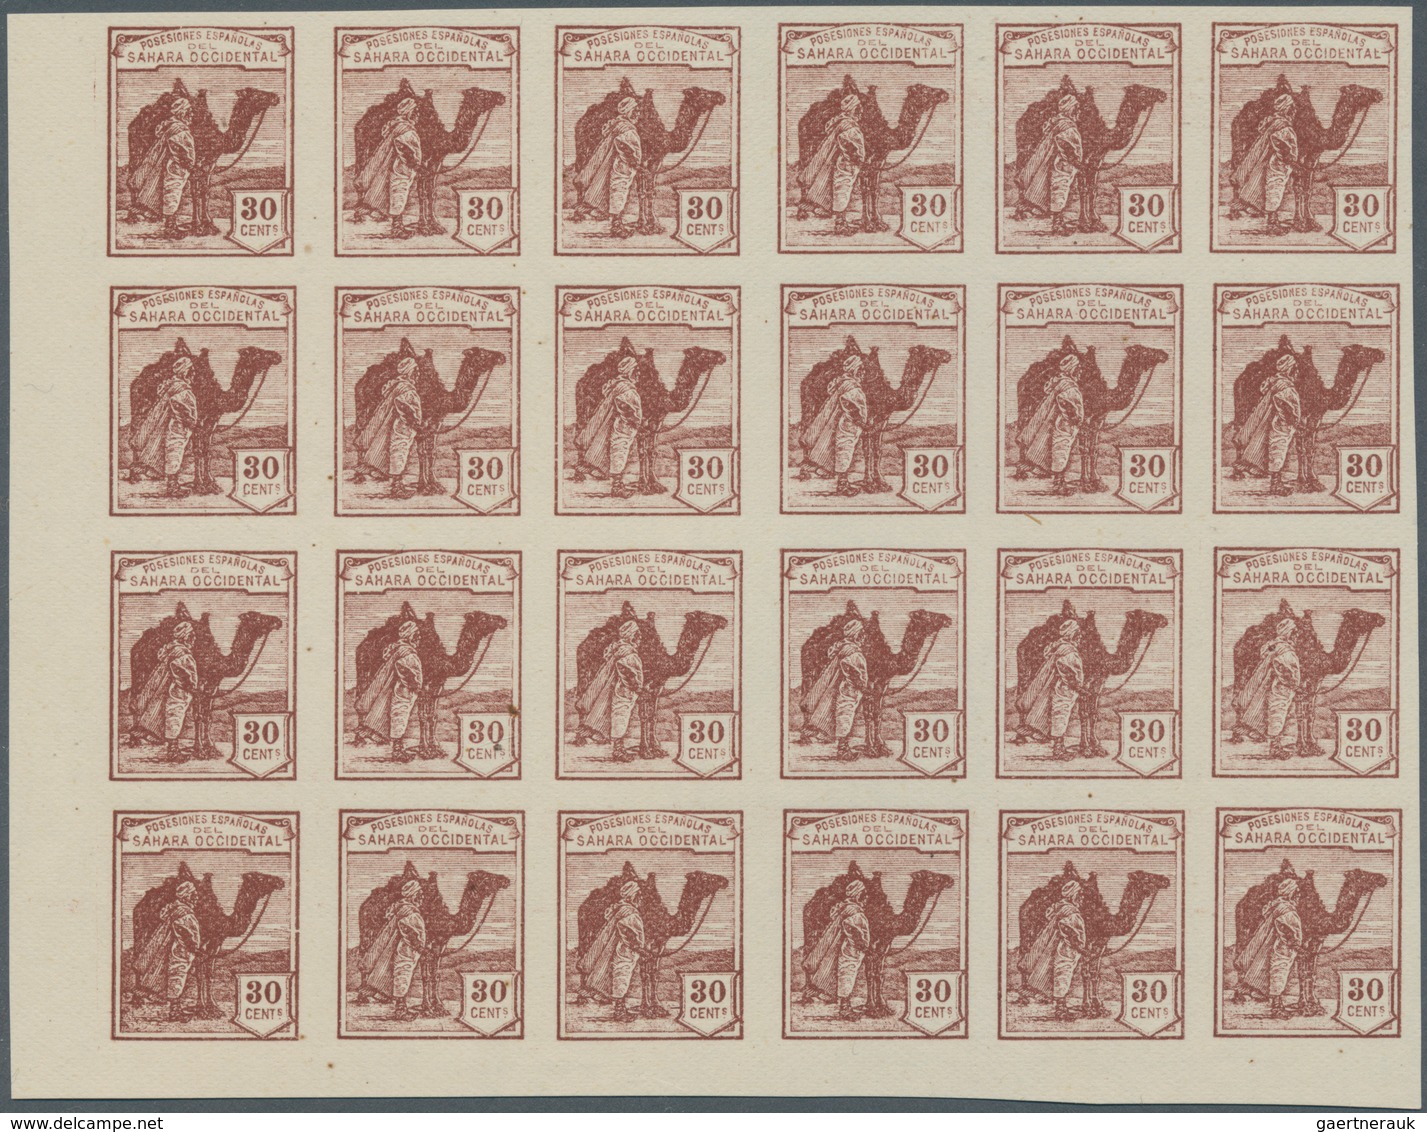 Spanisch-Sahara: 1936, Native with dromedary prepared reprint but NOT ISSUED set of ten without cont